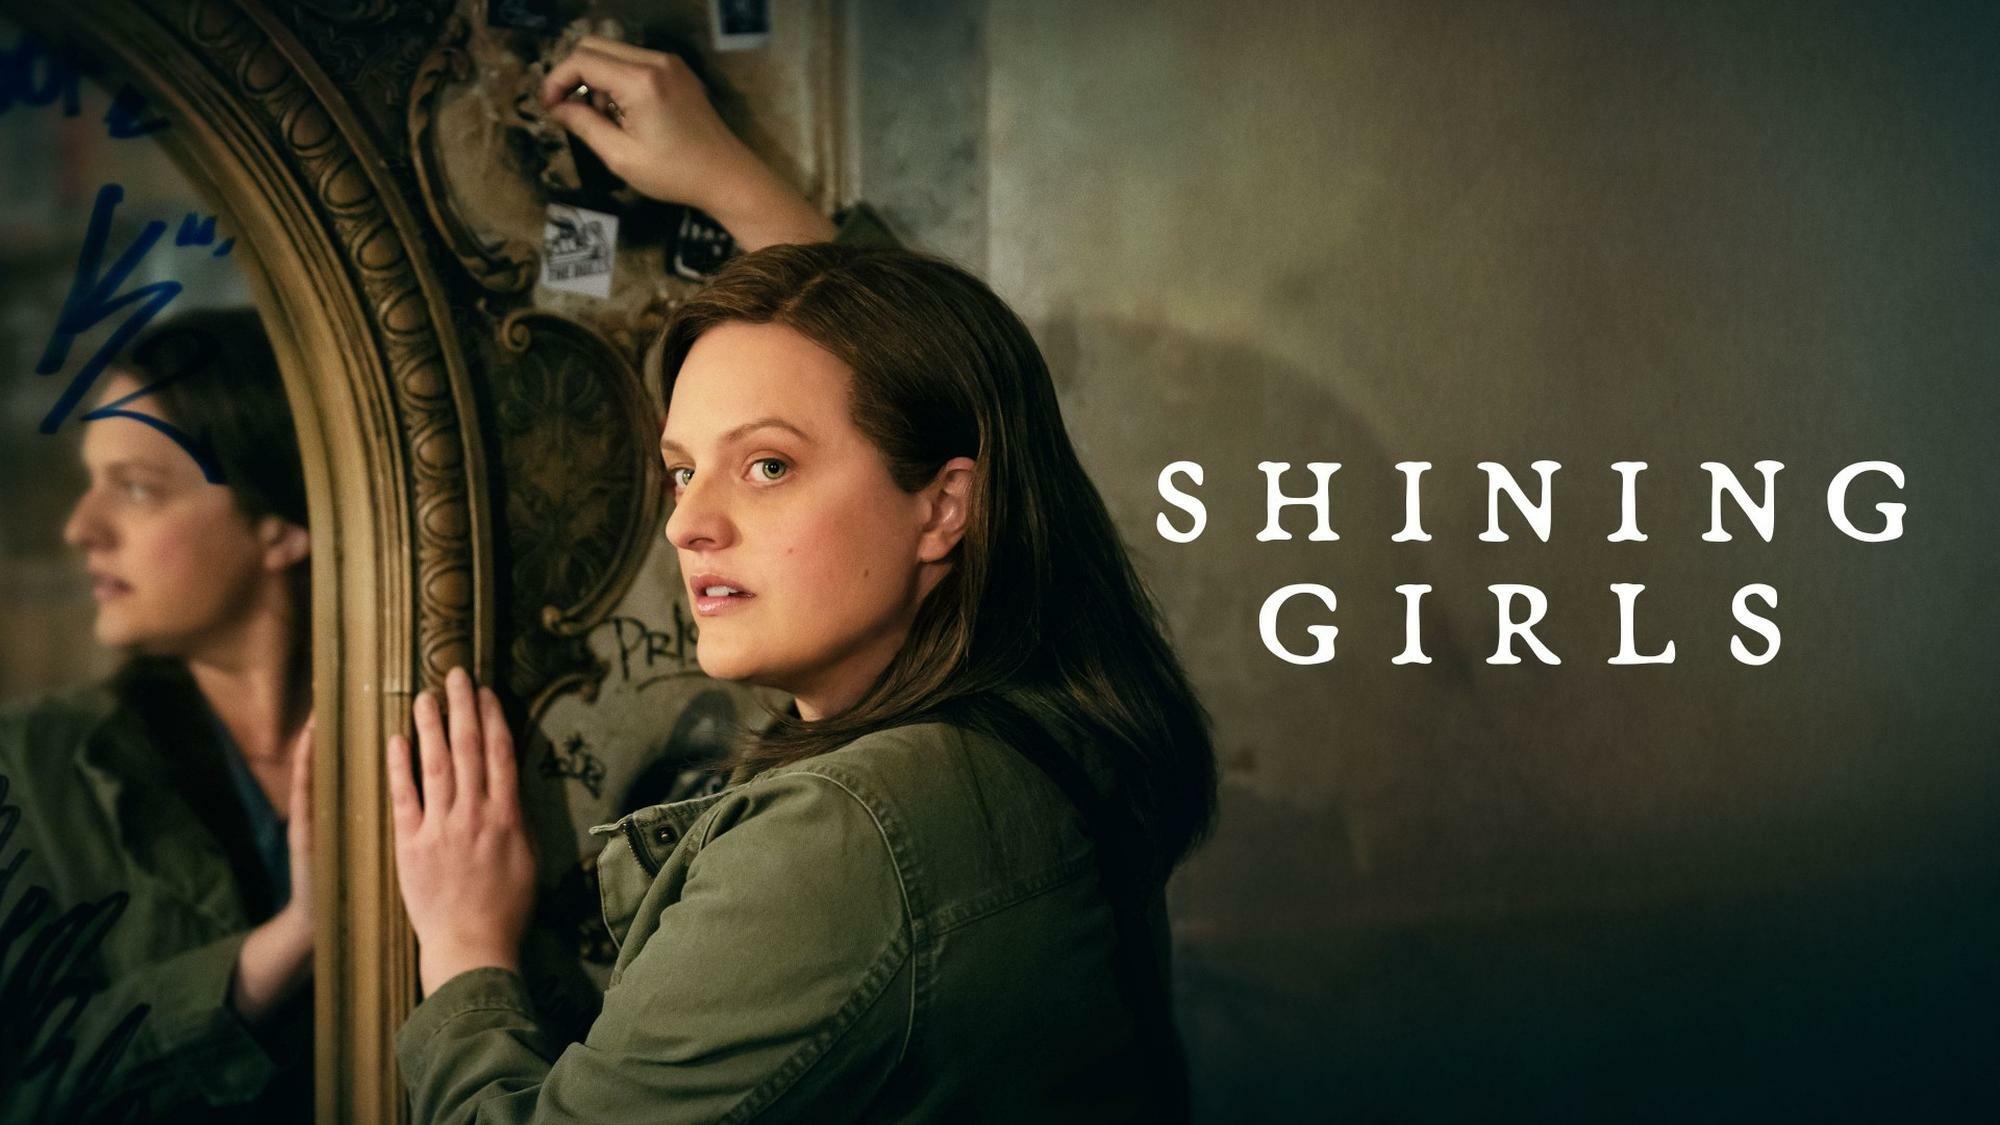 Shining Girls (TV Series): An American thriller streaming television series aired on Apple TV+. 2000x1130 HD Wallpaper.